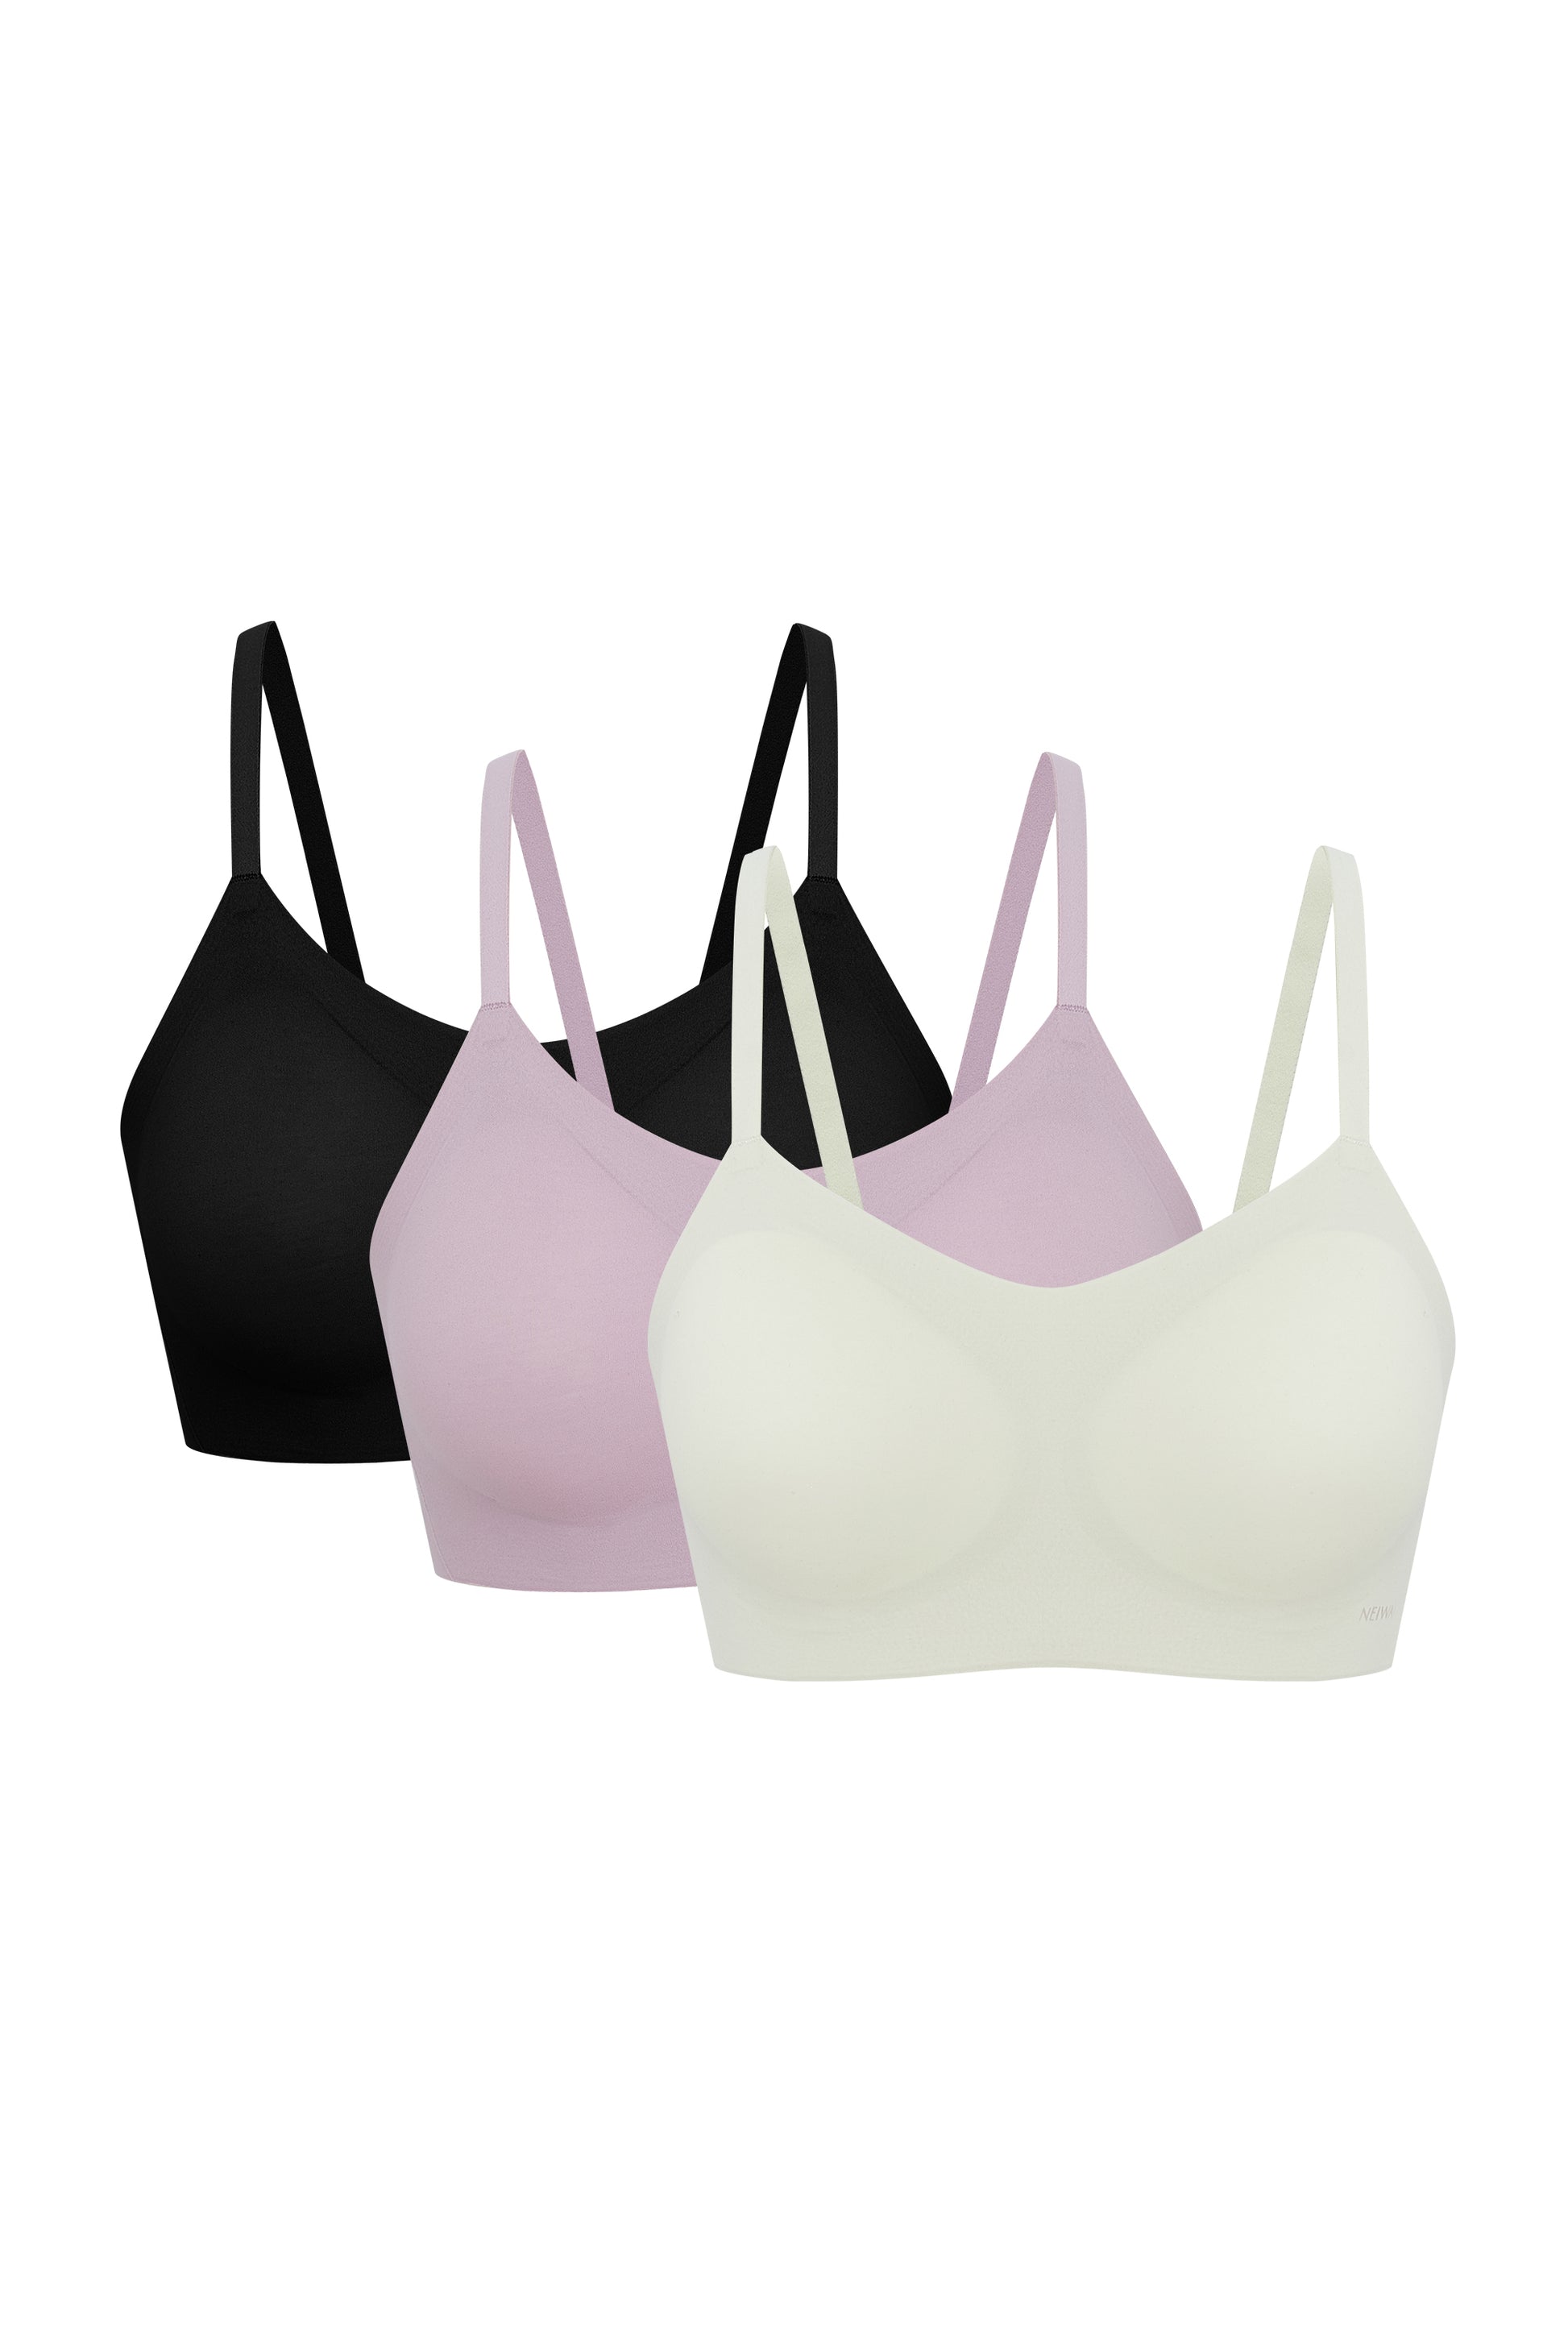 Flat lay image of off-white, lavender, and black bras